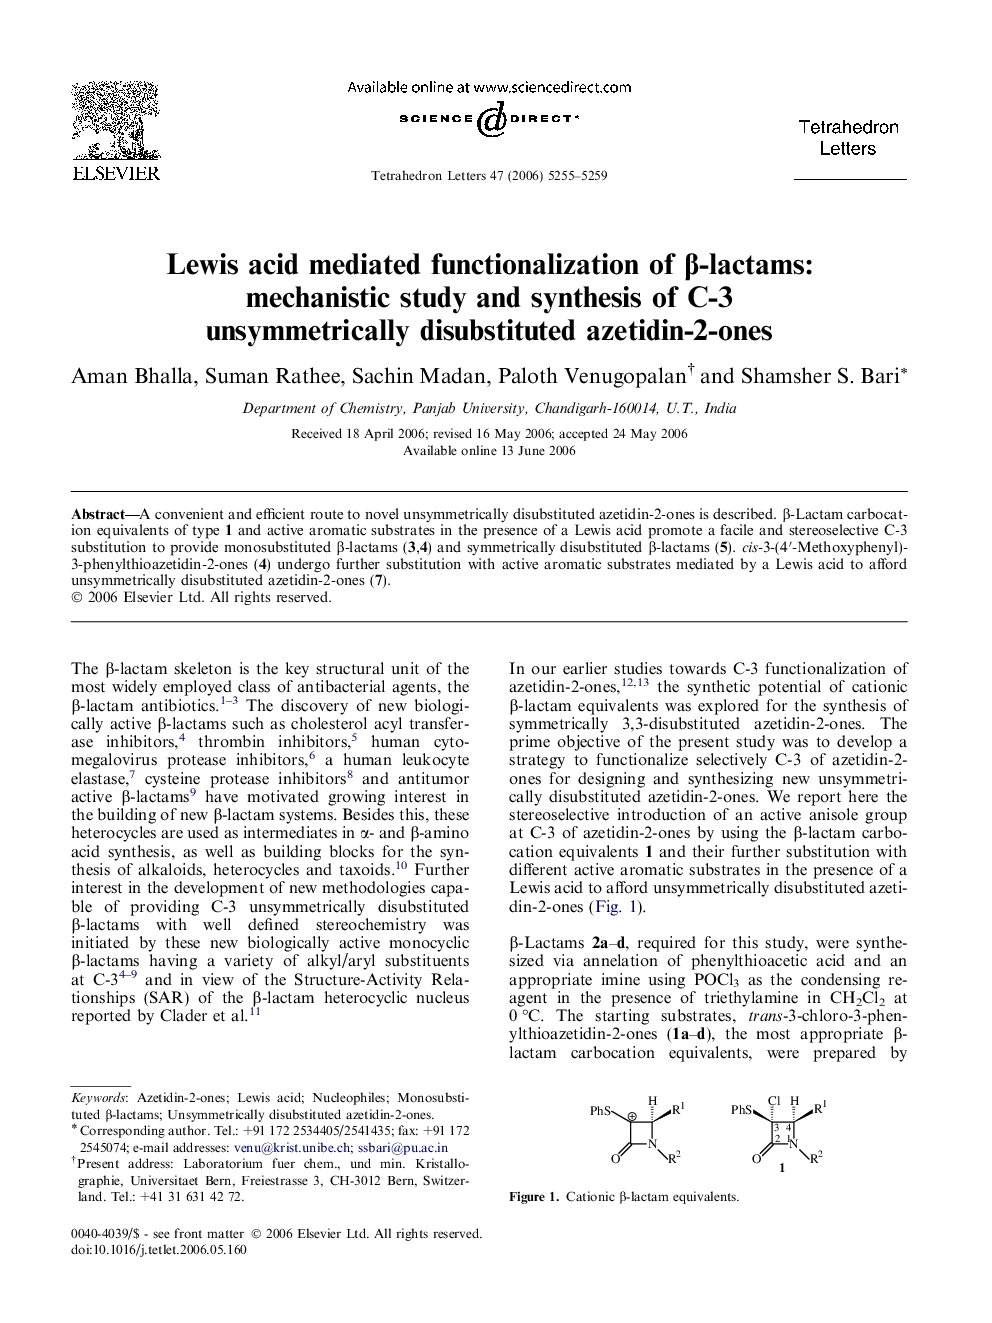 Lewis acid mediated functionalization of Î²-lactams: mechanistic study and synthesis of C-3 unsymmetrically disubstituted azetidin-2-ones